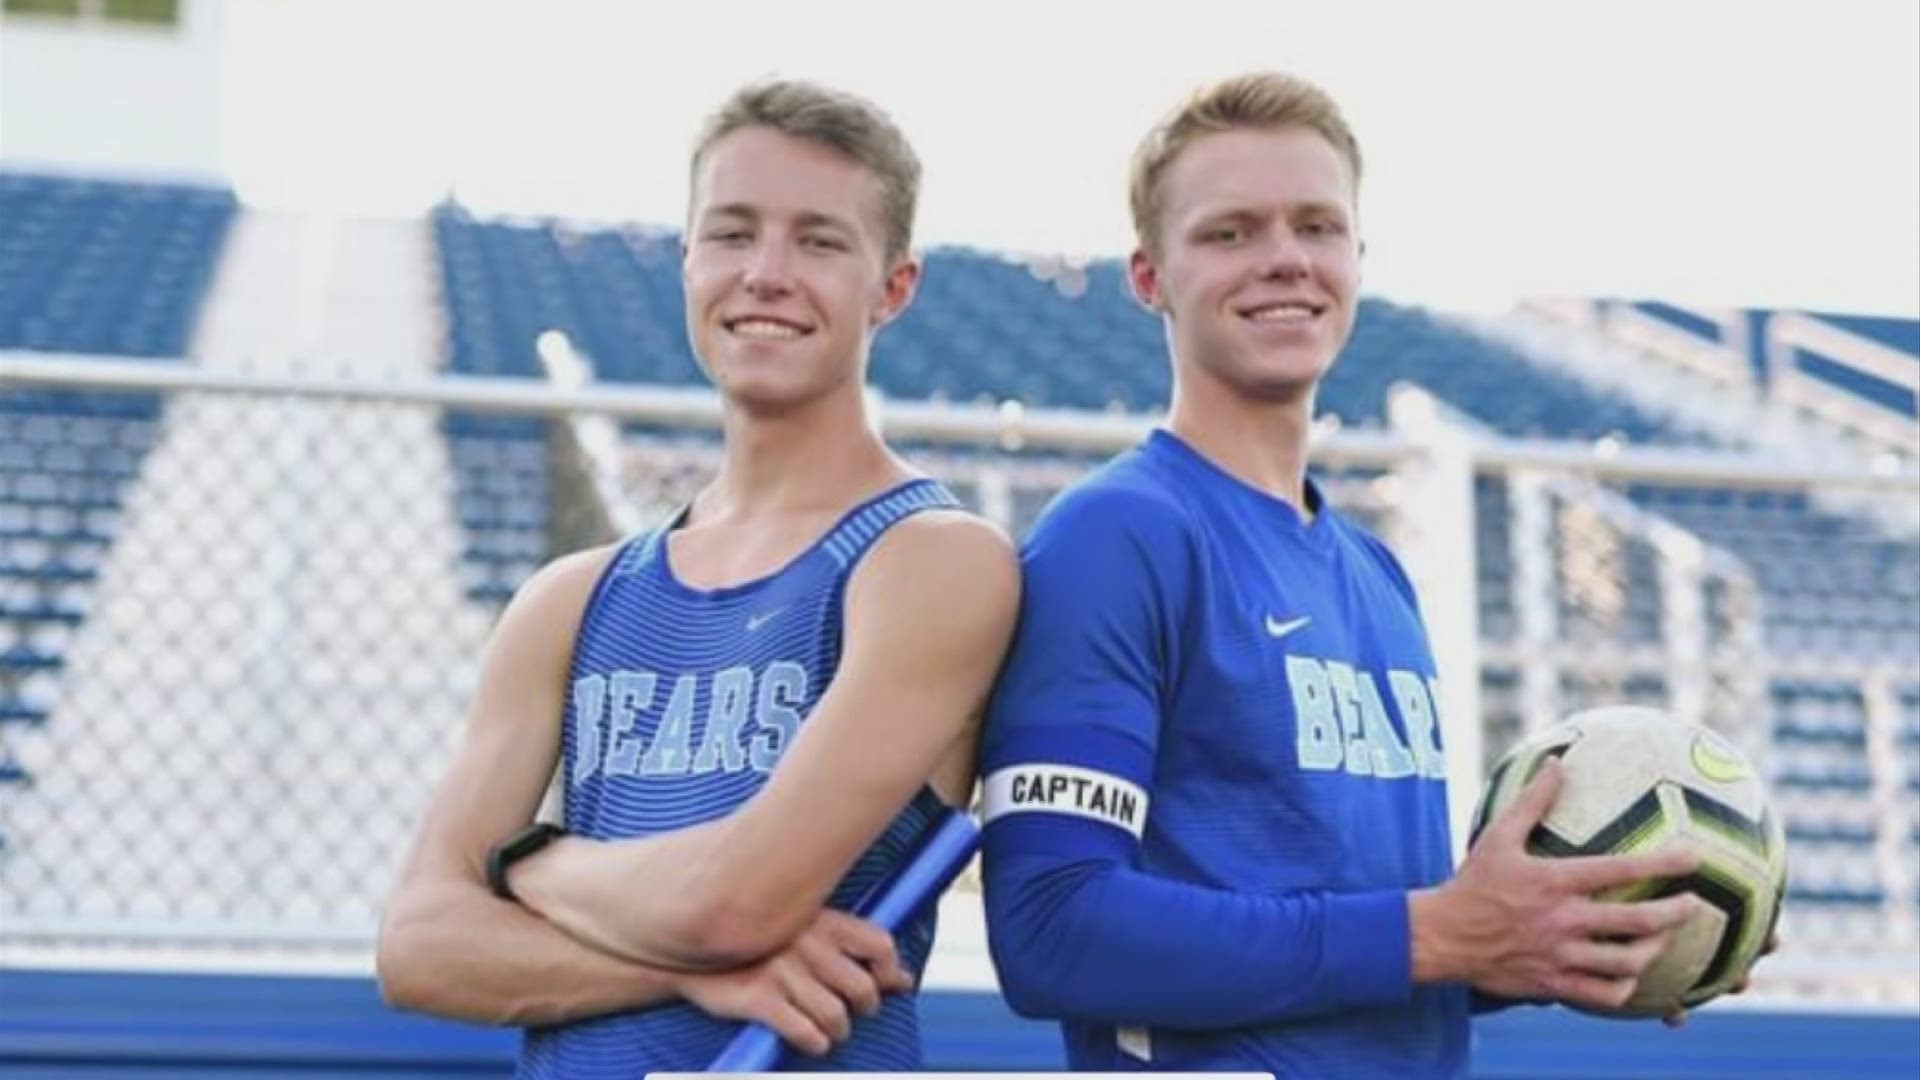 Kyle and Corey Rinehart are twins at Olentangy Berlin High School who excel and push each other to be better.